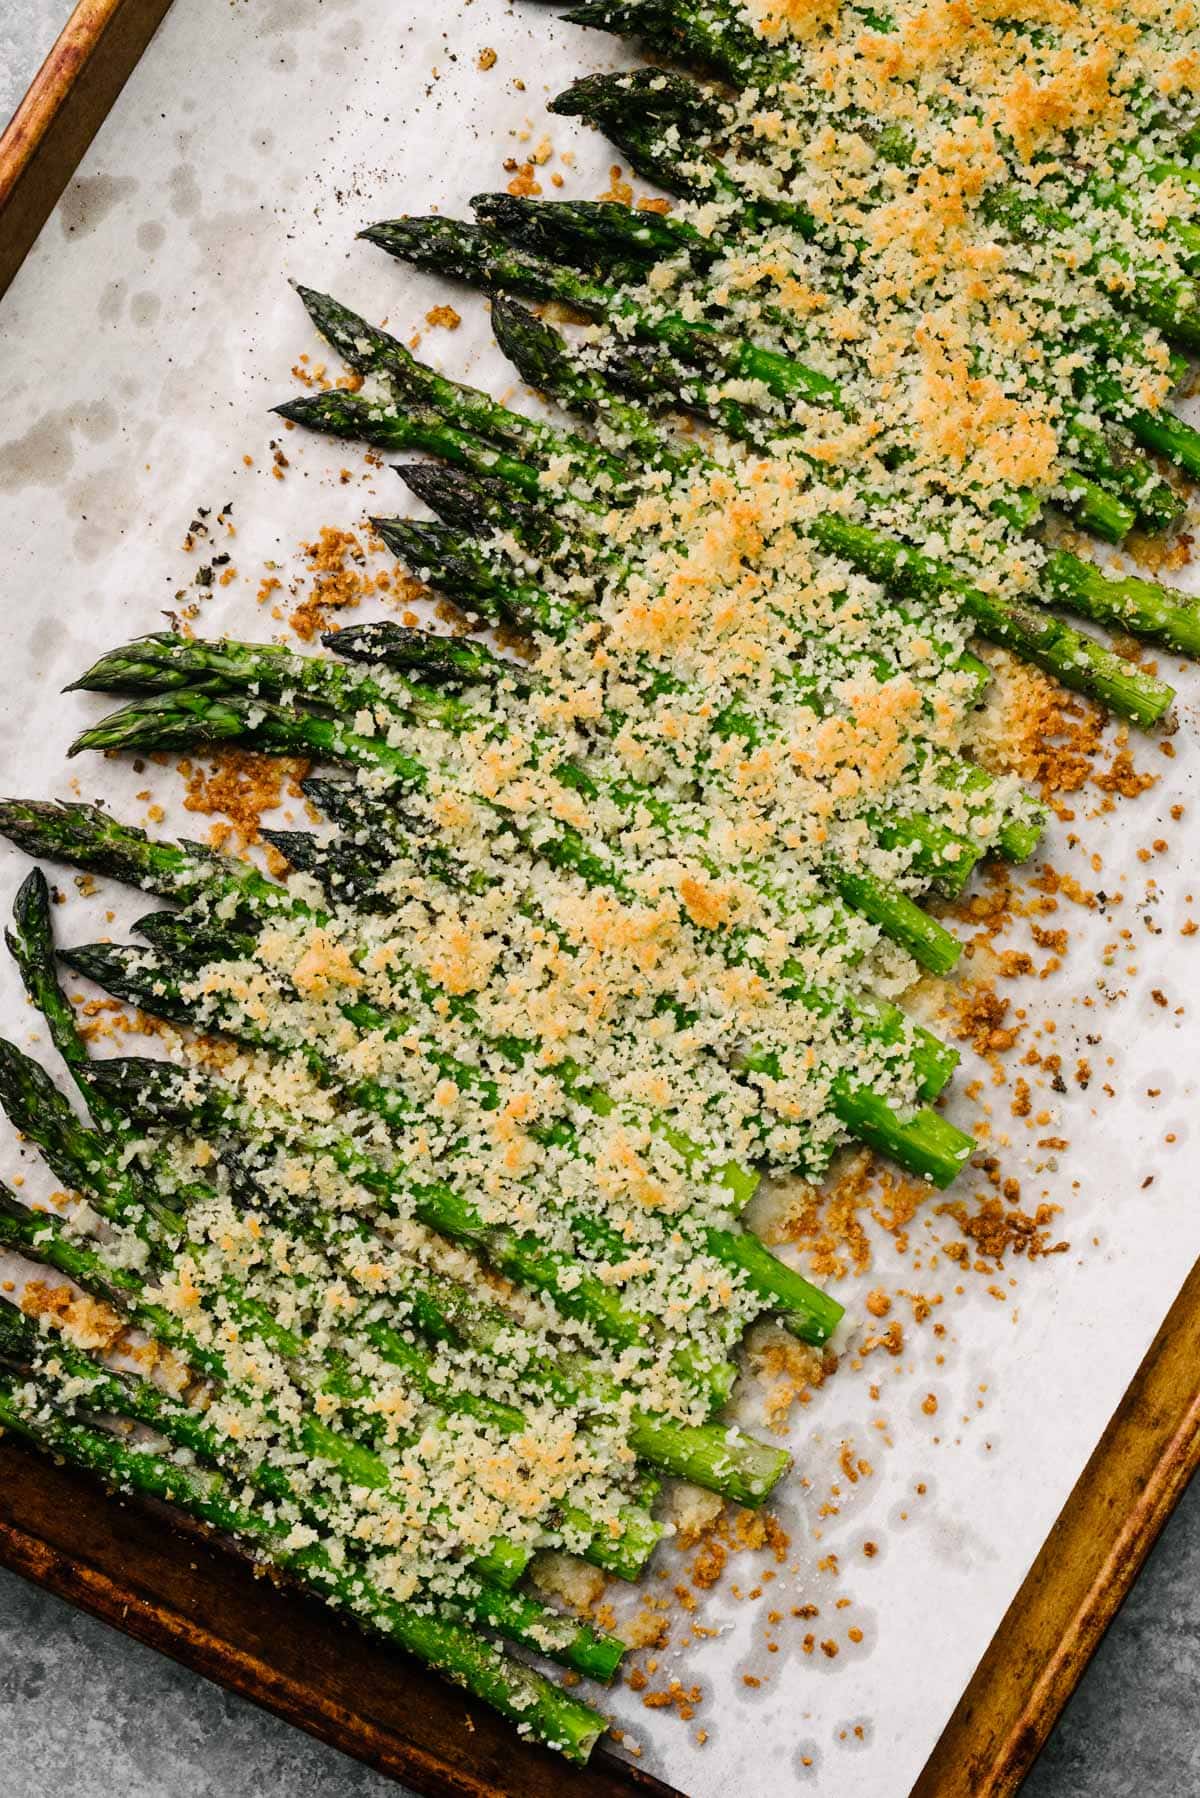 Roasted asparagus spears topped with a crispy parmesan and panko breadcrumb topping on a parchment lined baking sheet.